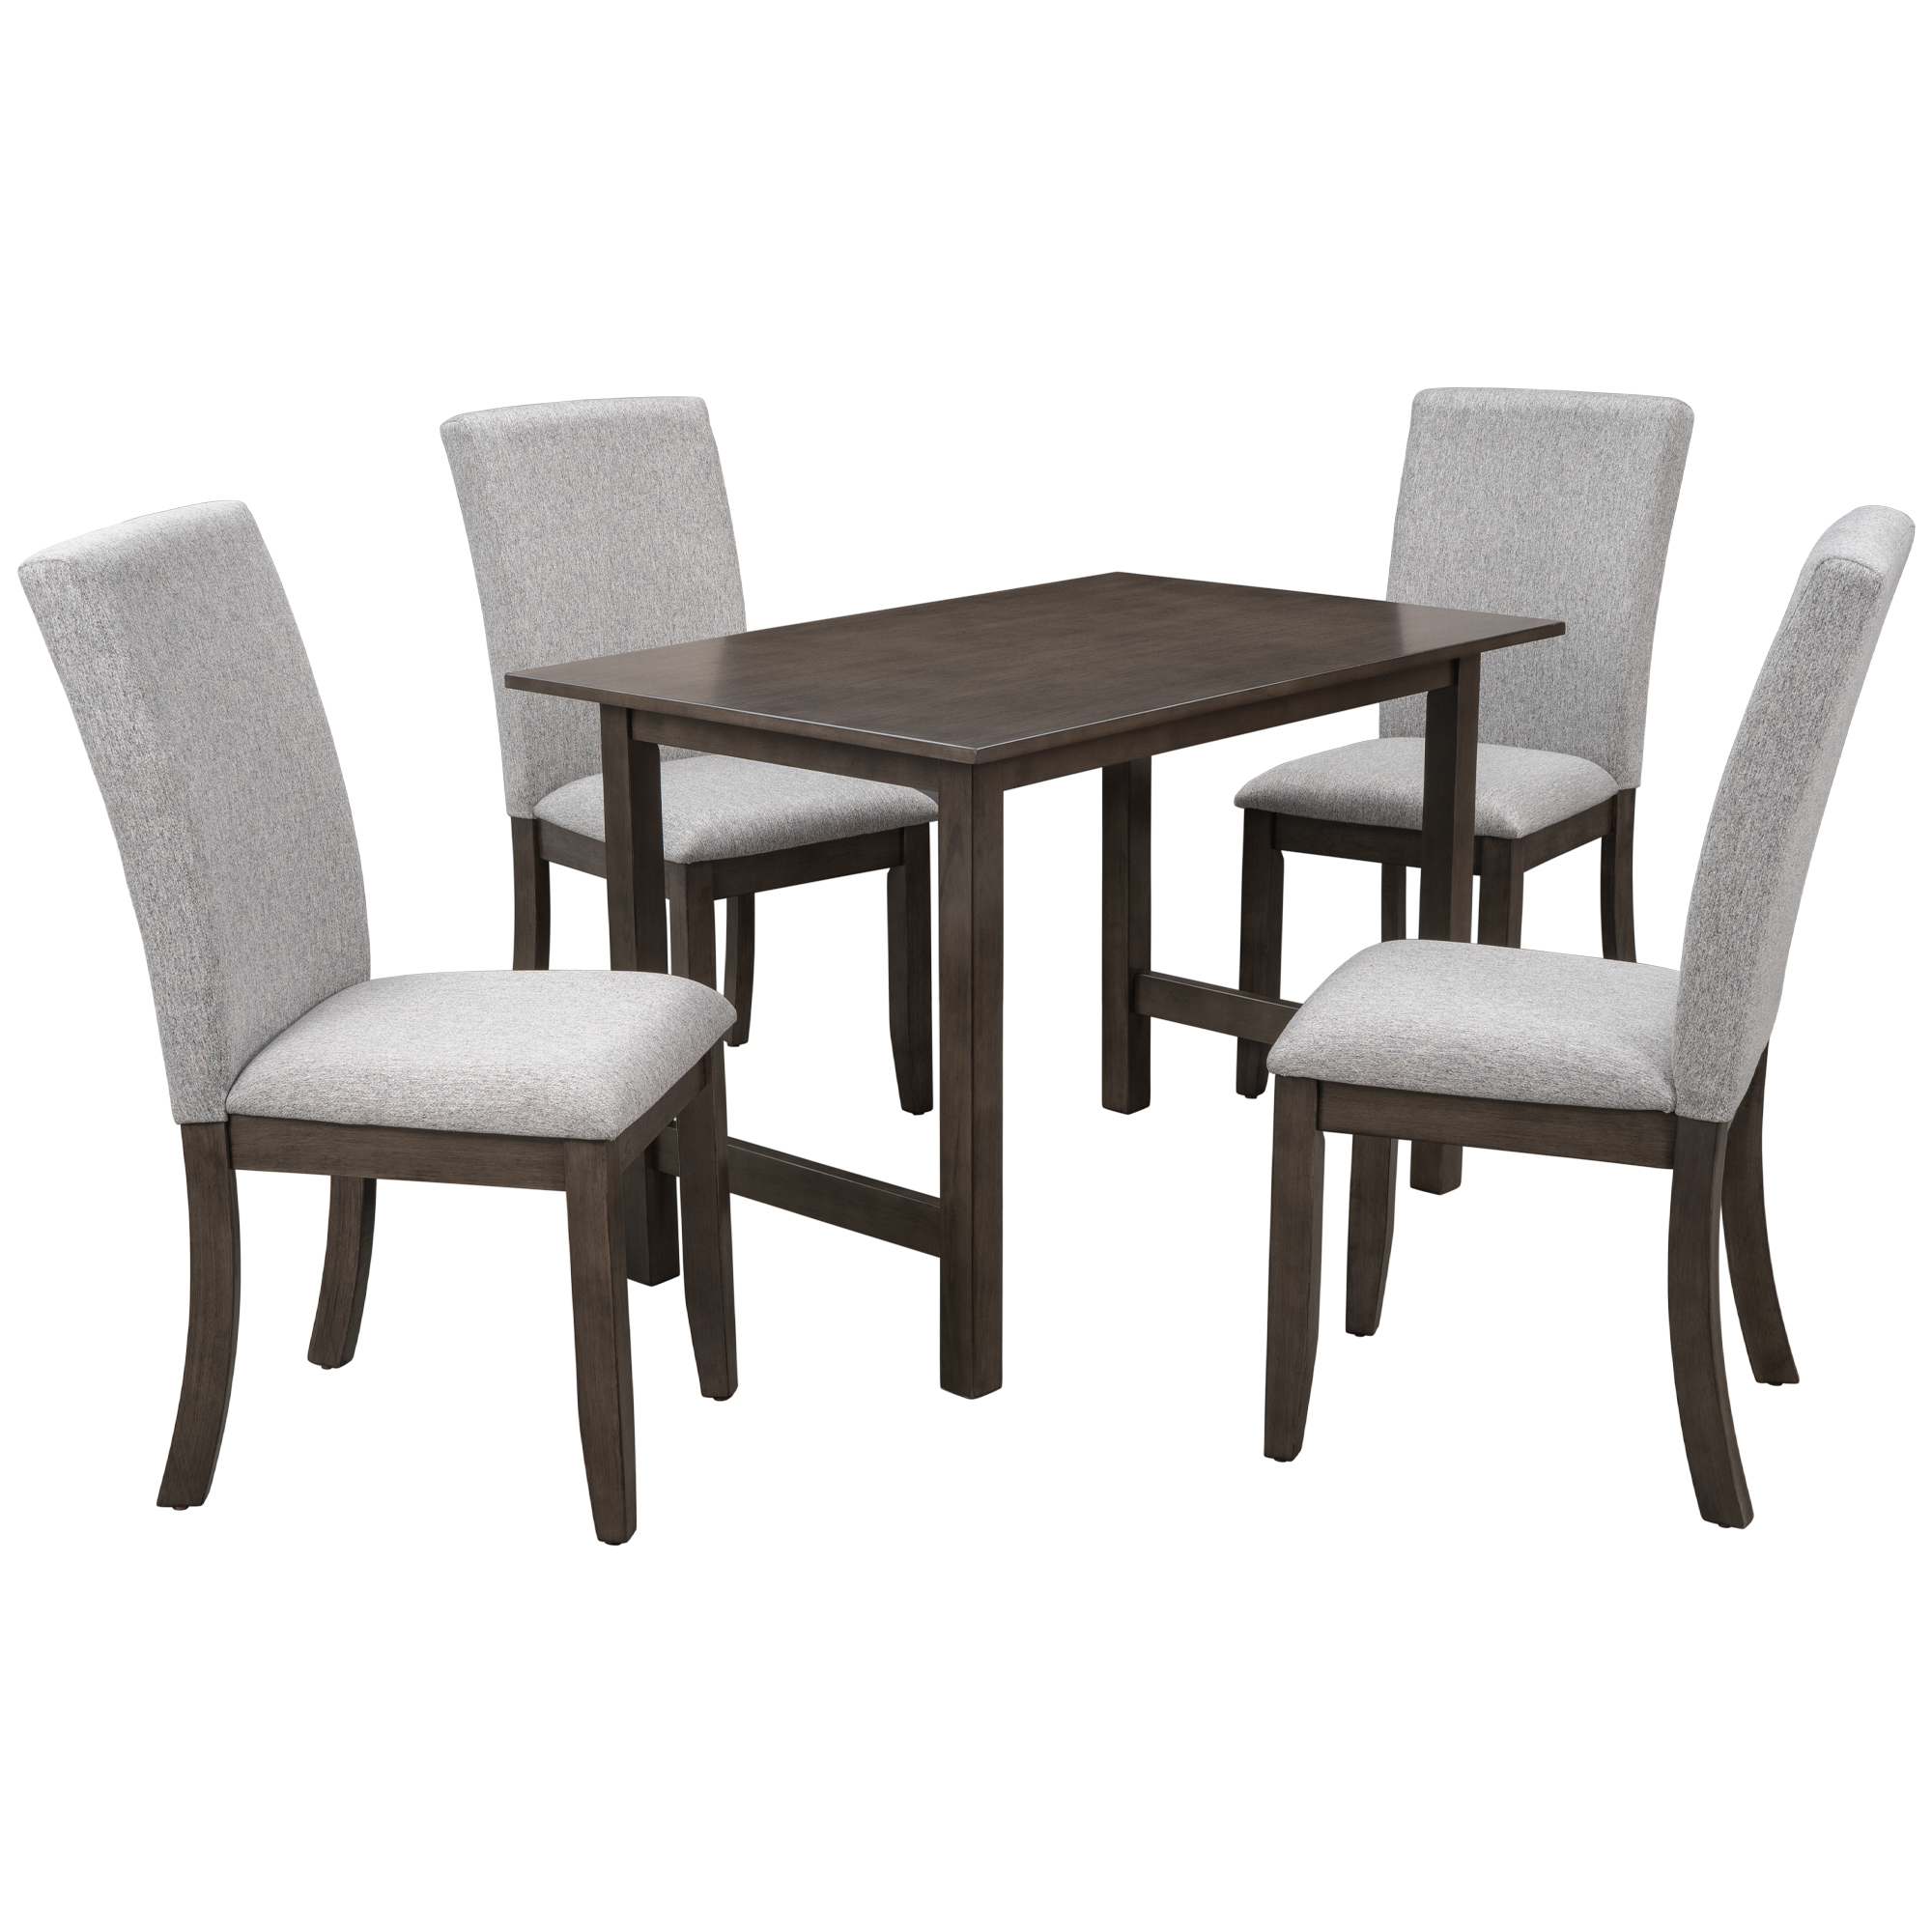  Farmhouse 5-Piece Wood Dining Table Set for 4, Kitchen Furniture Set with 4 Upholstered Dining Chairs for Small Places, Gray Table+Gray Chair-CASAINC